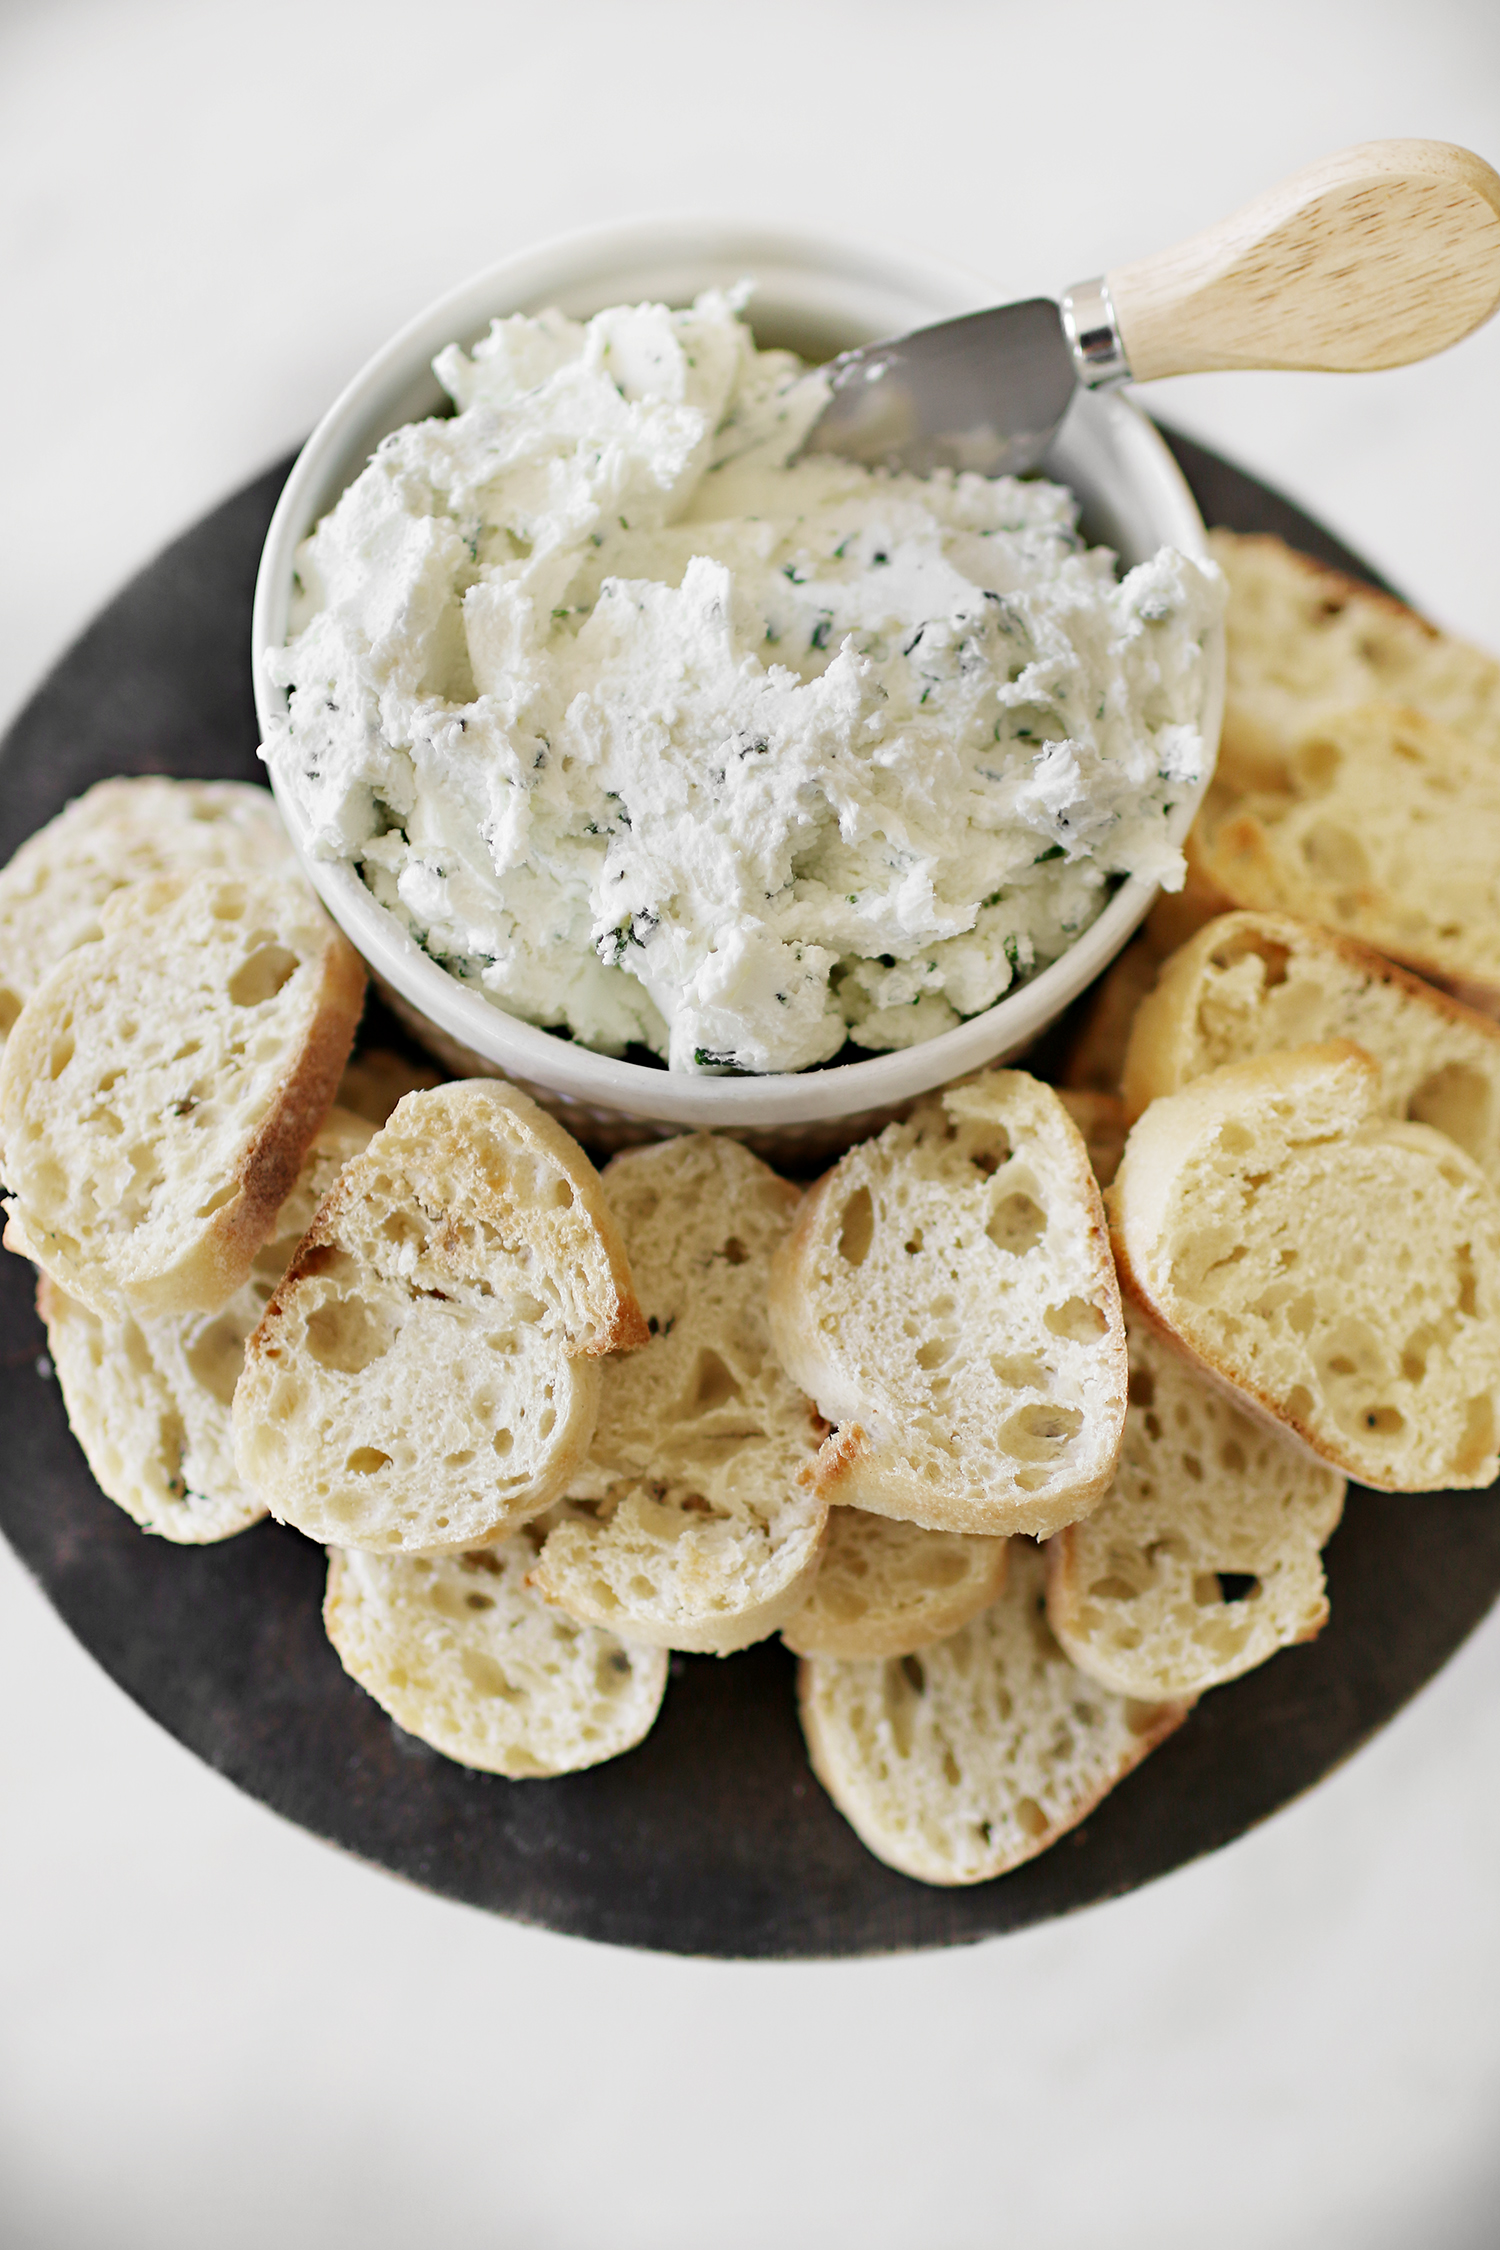 Goat Cheese and Herb Spread Appetizer. The perfect touch to entertaining guests this holiday season and one that will be a crowd pleaser! Catch the entire recipe and how-to over at Haus of Layne #EasyAppetizers #AppetizerRecipe #HolidayRecipes #EasyHolidayRecipes #HolidayAppetizerRecipe